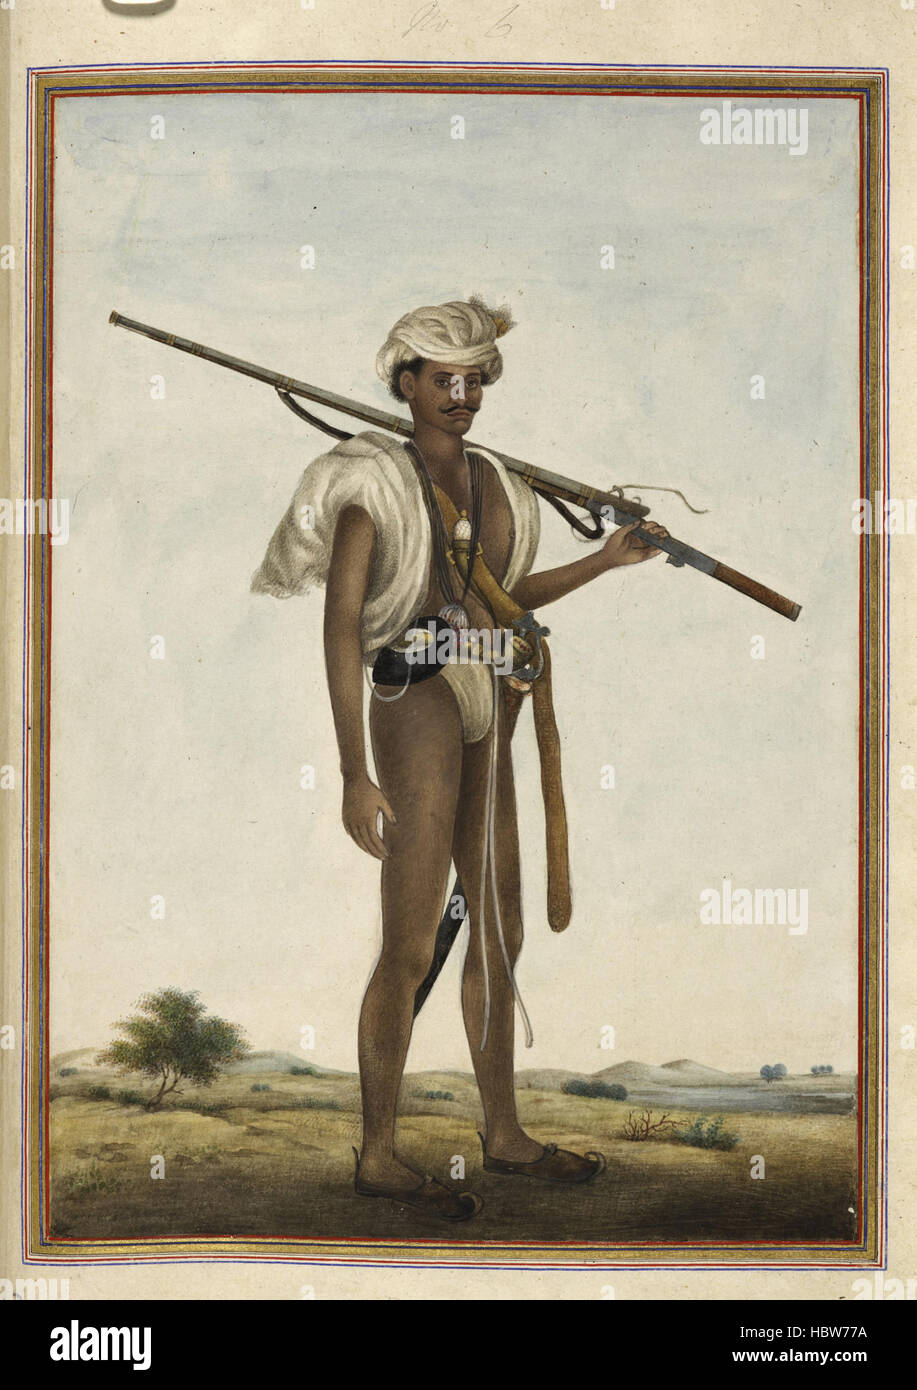 Tashrih al-aqvam, an account of origins and occupations of some of the sects, castes and tribes of India. - caption: 'Warrior (Mevati). Mevati, a Kshatriya group who lived in the region south-west of Delhi and were warriors more usually termed Meos.' Tashrih al-aqvam, an account of origins and occupations of some Stock Photo